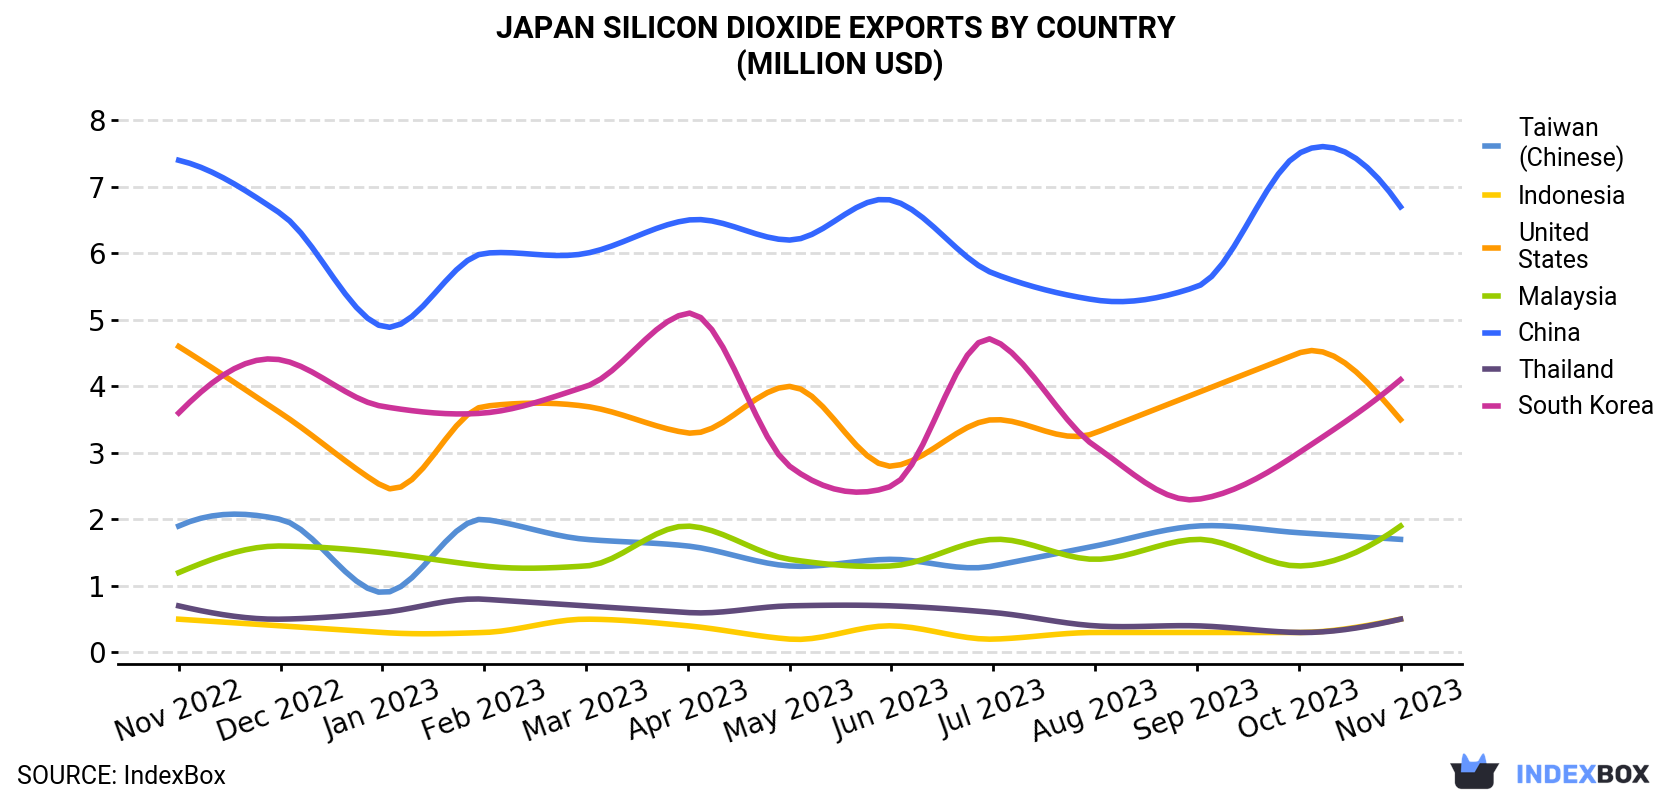 Japan Silicon Dioxide Exports By Country (Million USD)